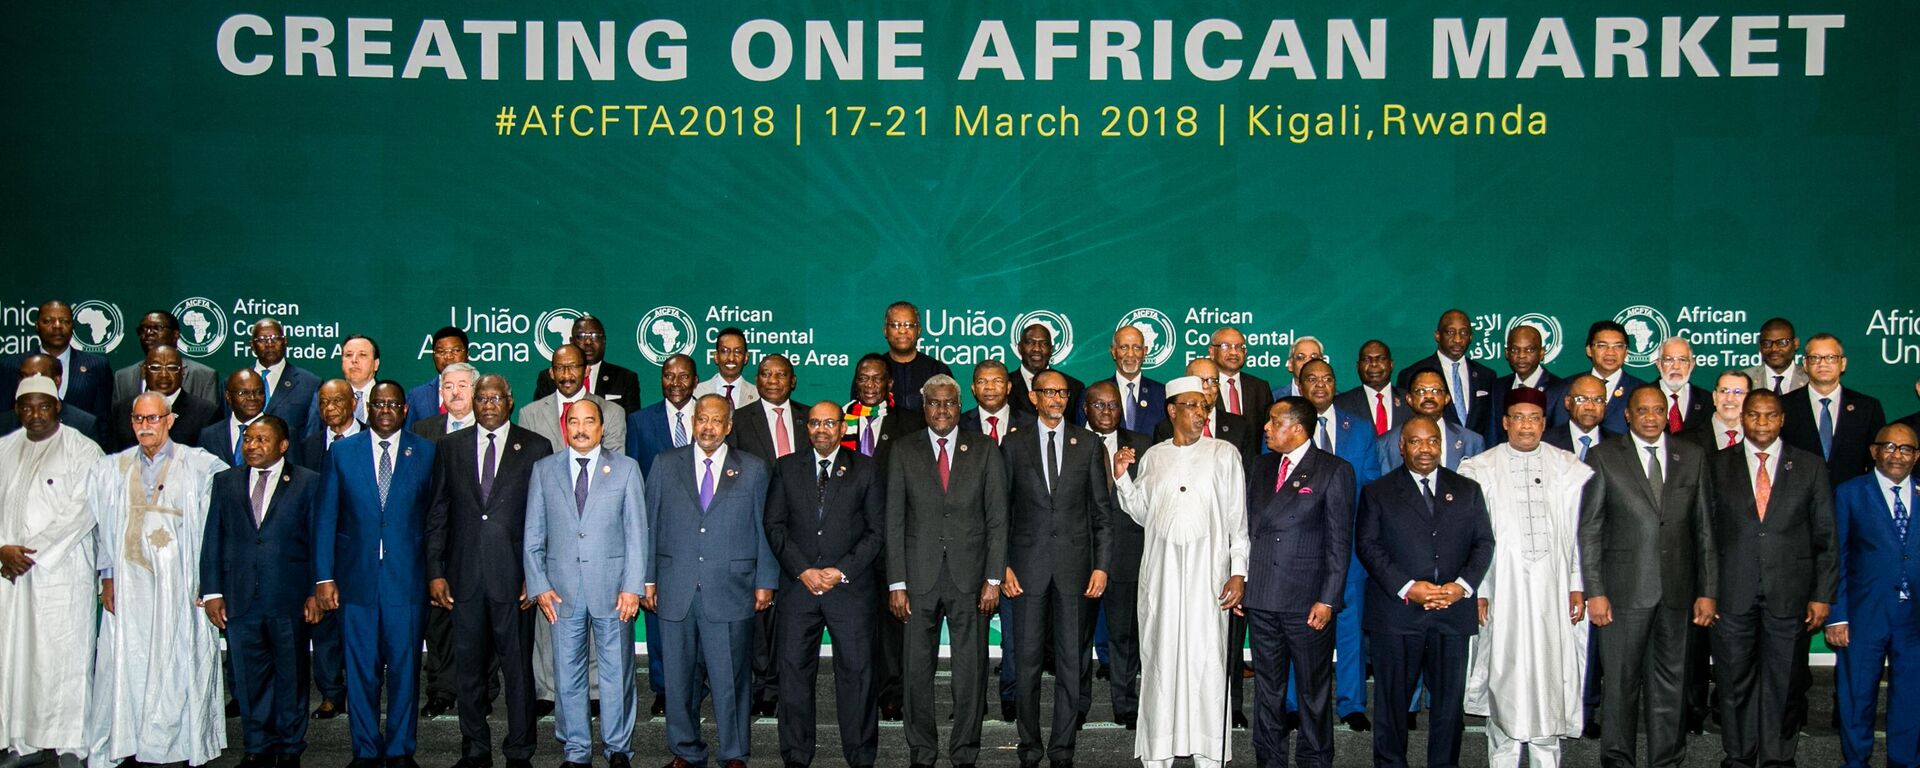 African heads of states and governments pose during the African Union (AU) Summit for the agreement to establish the African Continental Free Trade Area in Kigali, Rwanda, on March 21, 2018. - Sputnik International, 1920, 17.02.2023